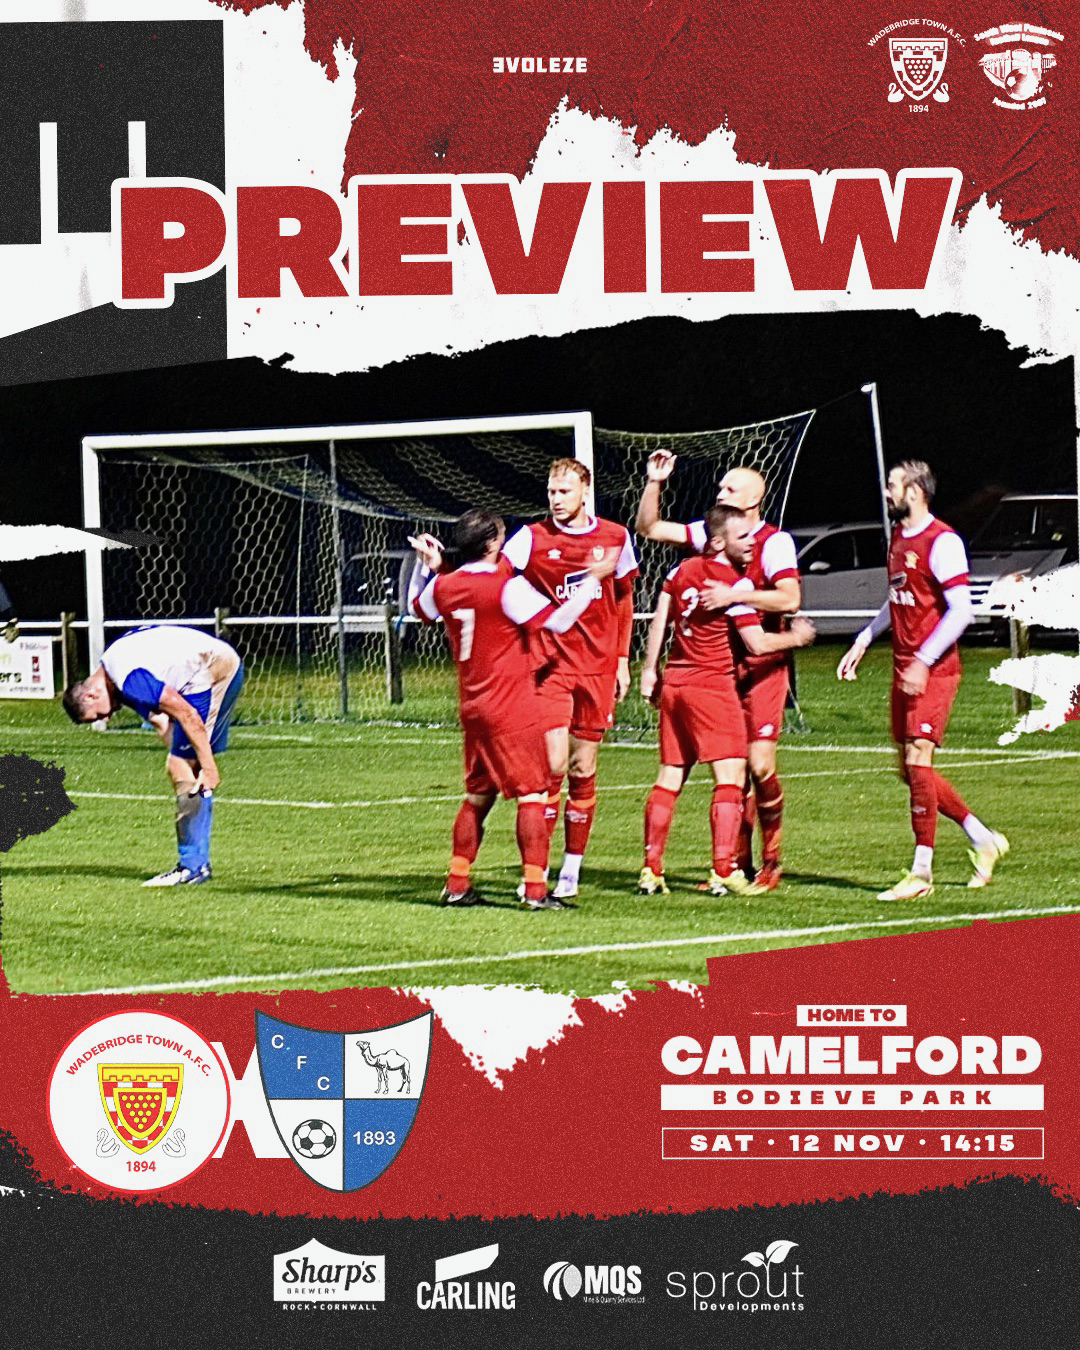 From the `Dugout (Camelford home 2022)